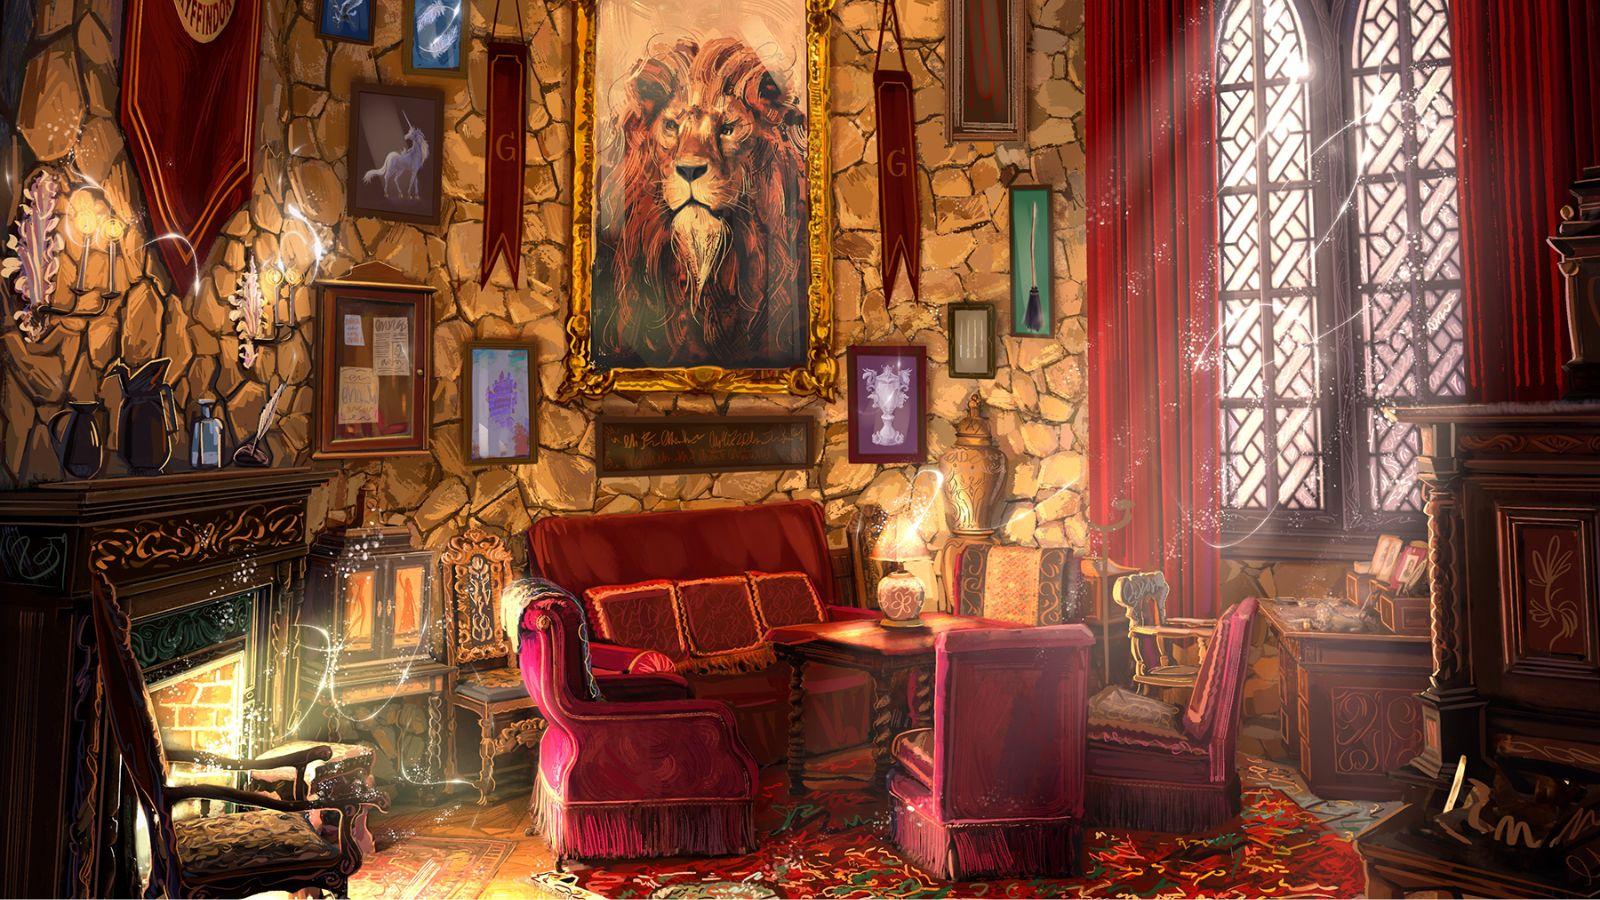 The Gryffindor house common room.